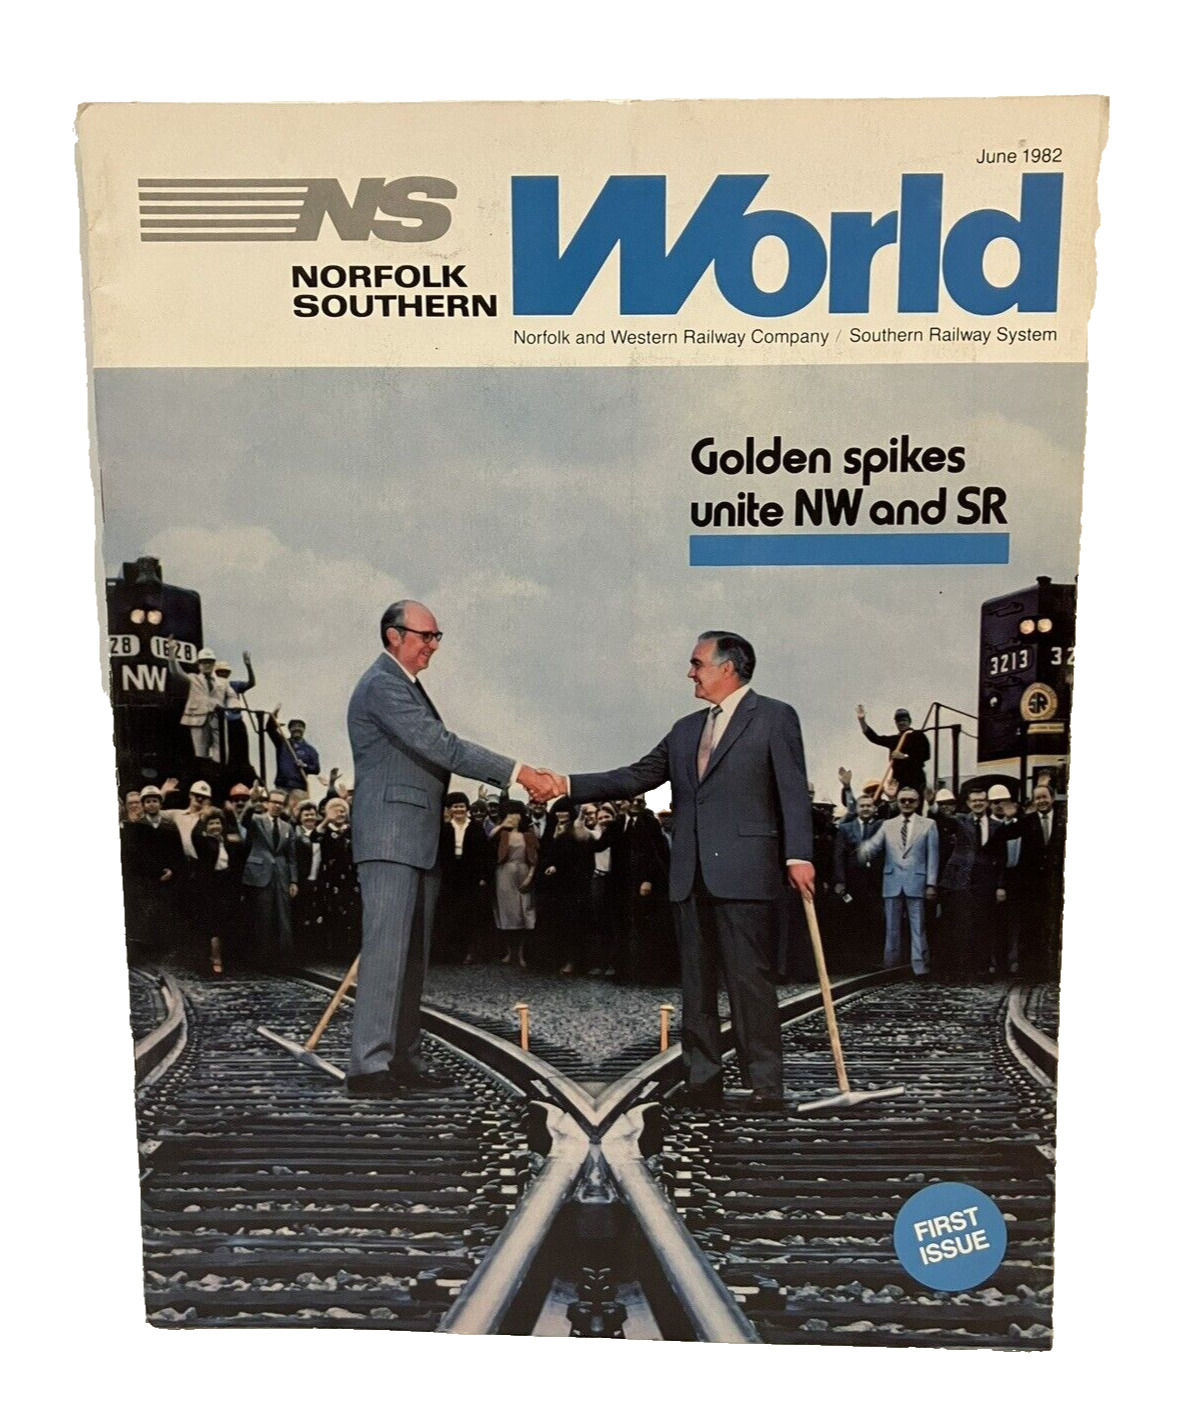 NS Norfolk Southern World Employee Magazine First Issue 1st Quarter Report 1982